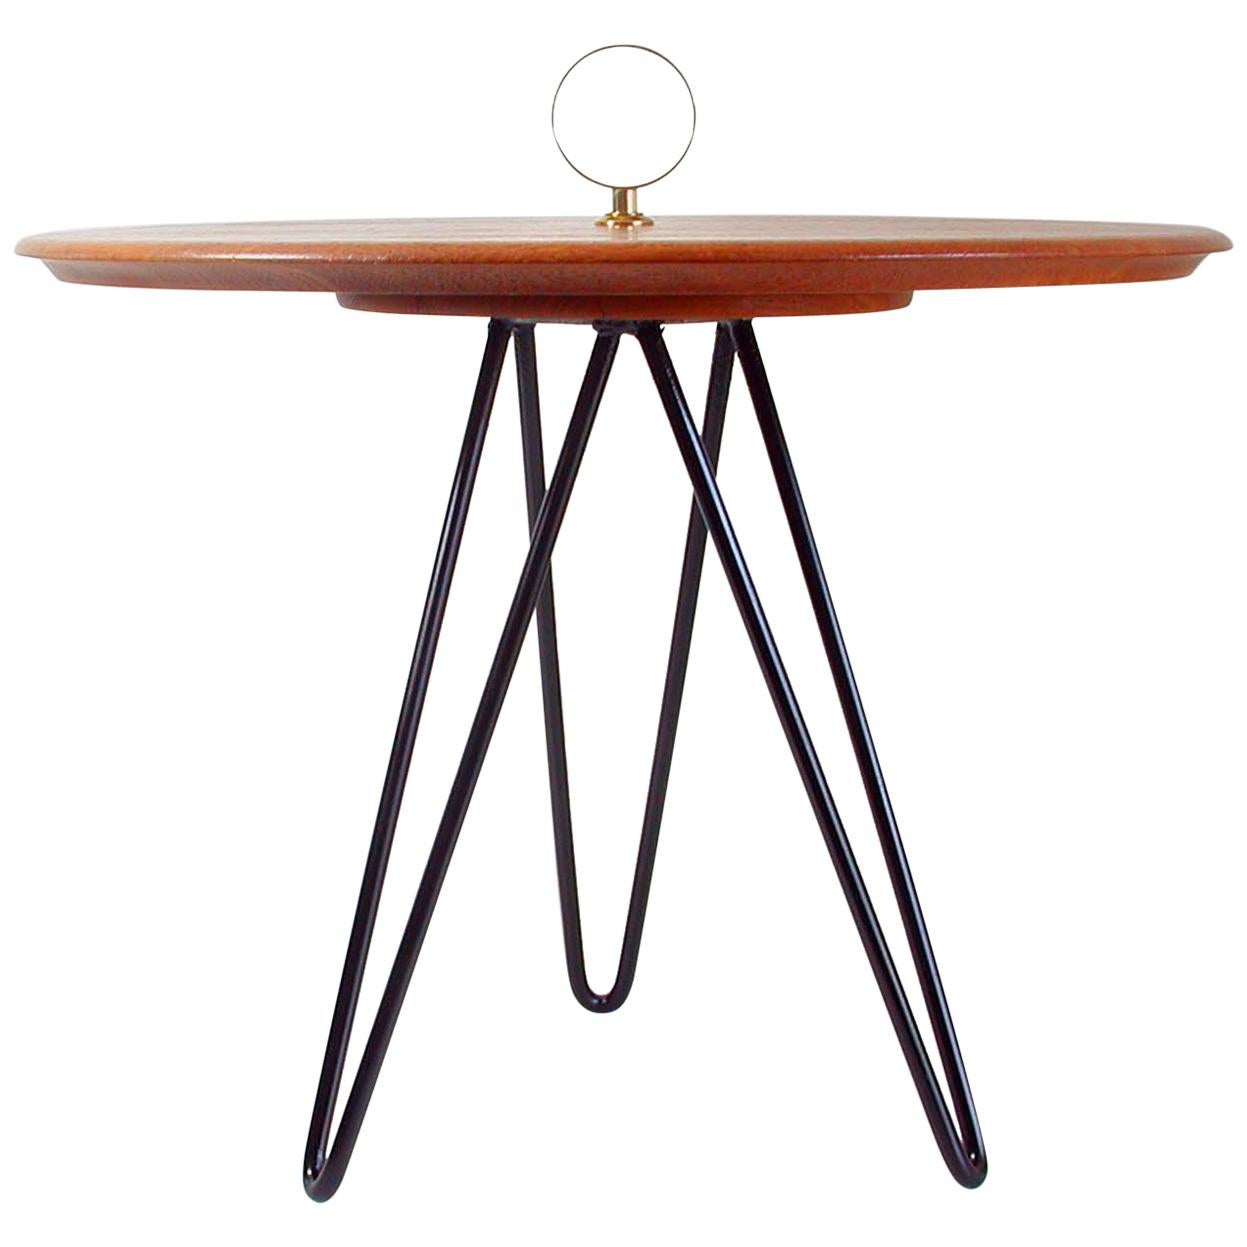 Midcentury Teak, Brass and Cast Iron Tripod Side Table by Digsmed, Denmark For Sale